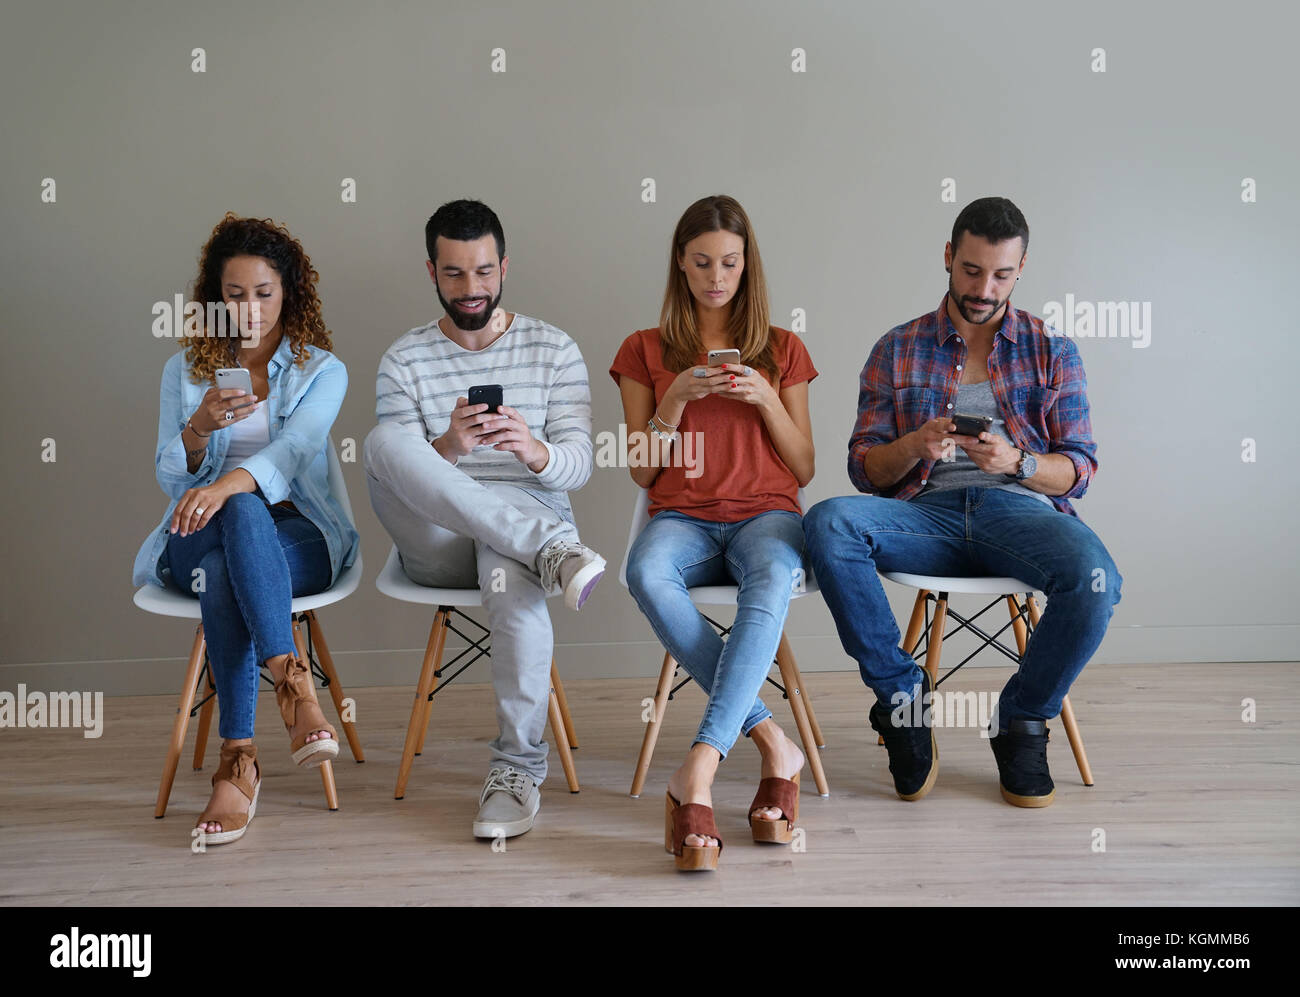 Young people in waiting room looking at smartphone Stock Photo